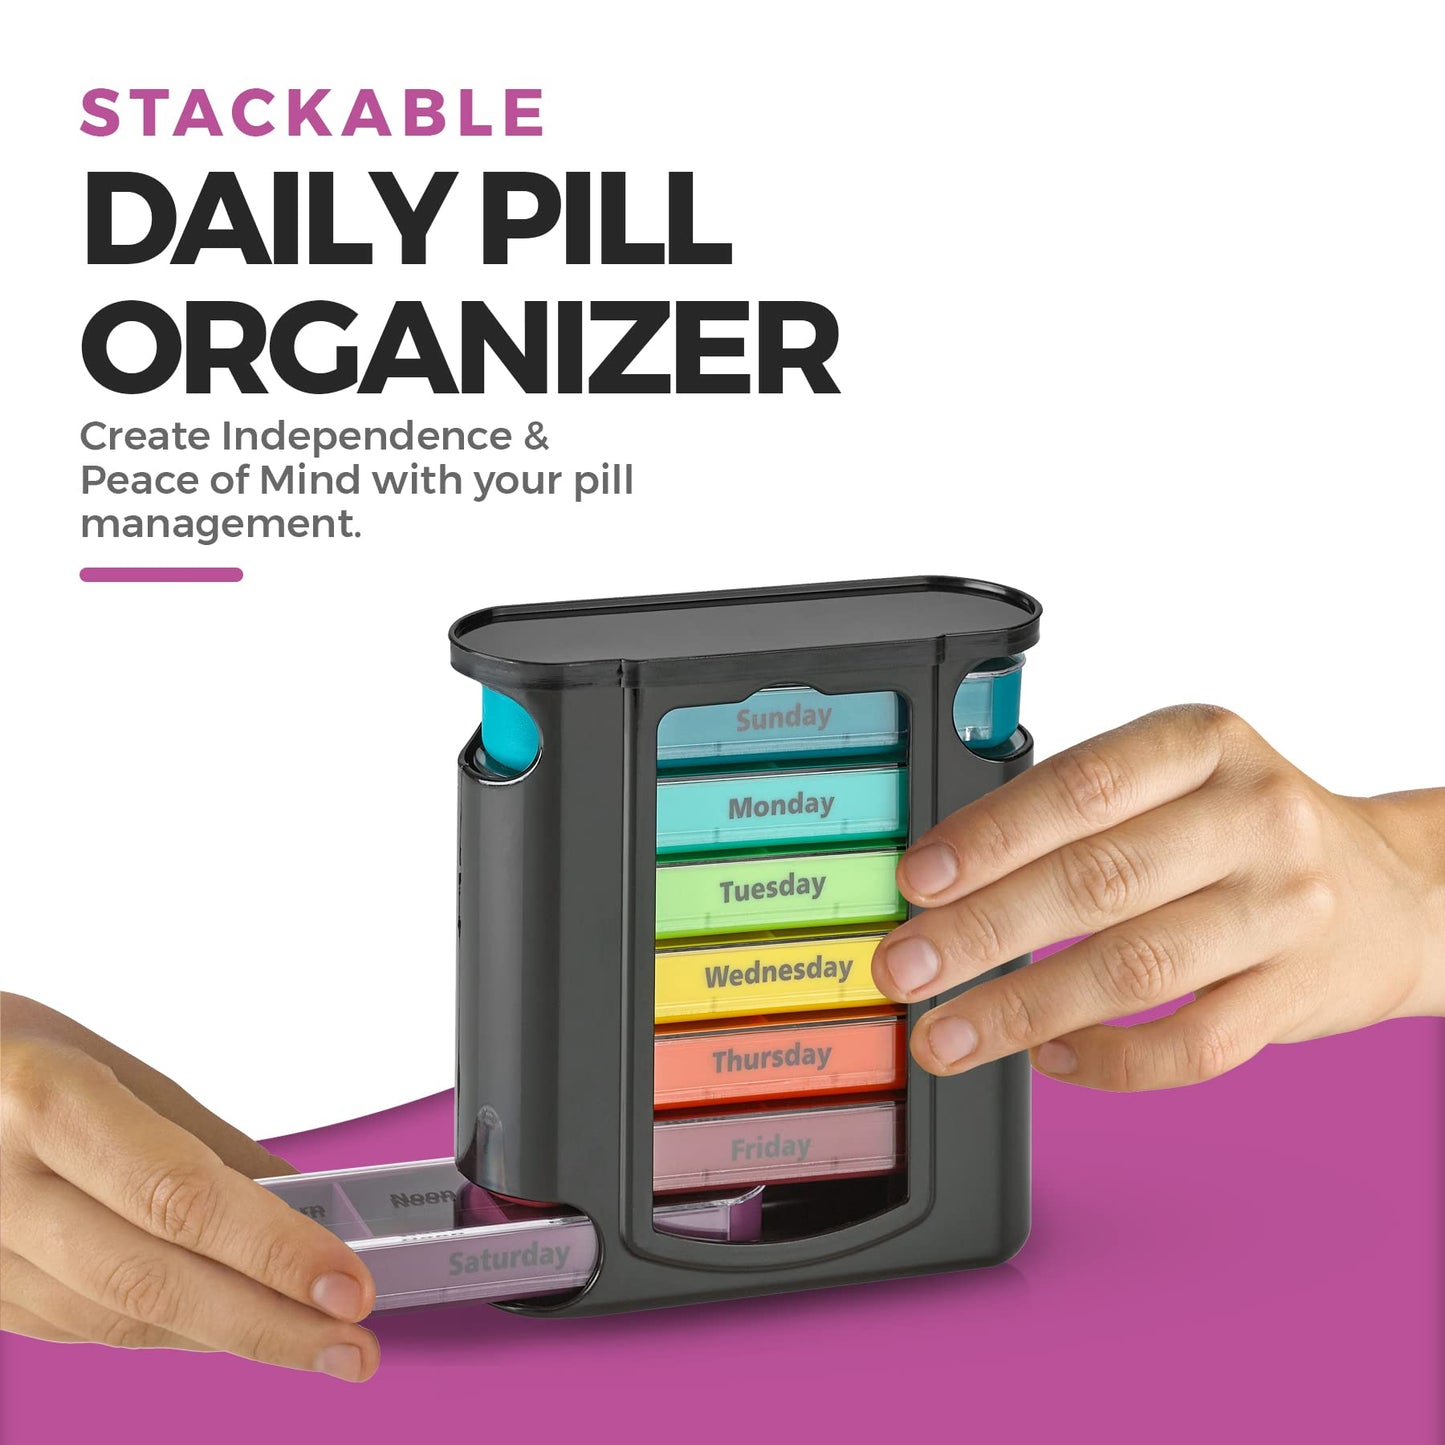 Stackable Daily Pill Organizer - (4 Times a Day) Weekly Medication Reminder - Premium Weekly AM/PM Pill Box with 7 Individual Stacking Cases, a Everyday Medicine Organizer for Vitamins